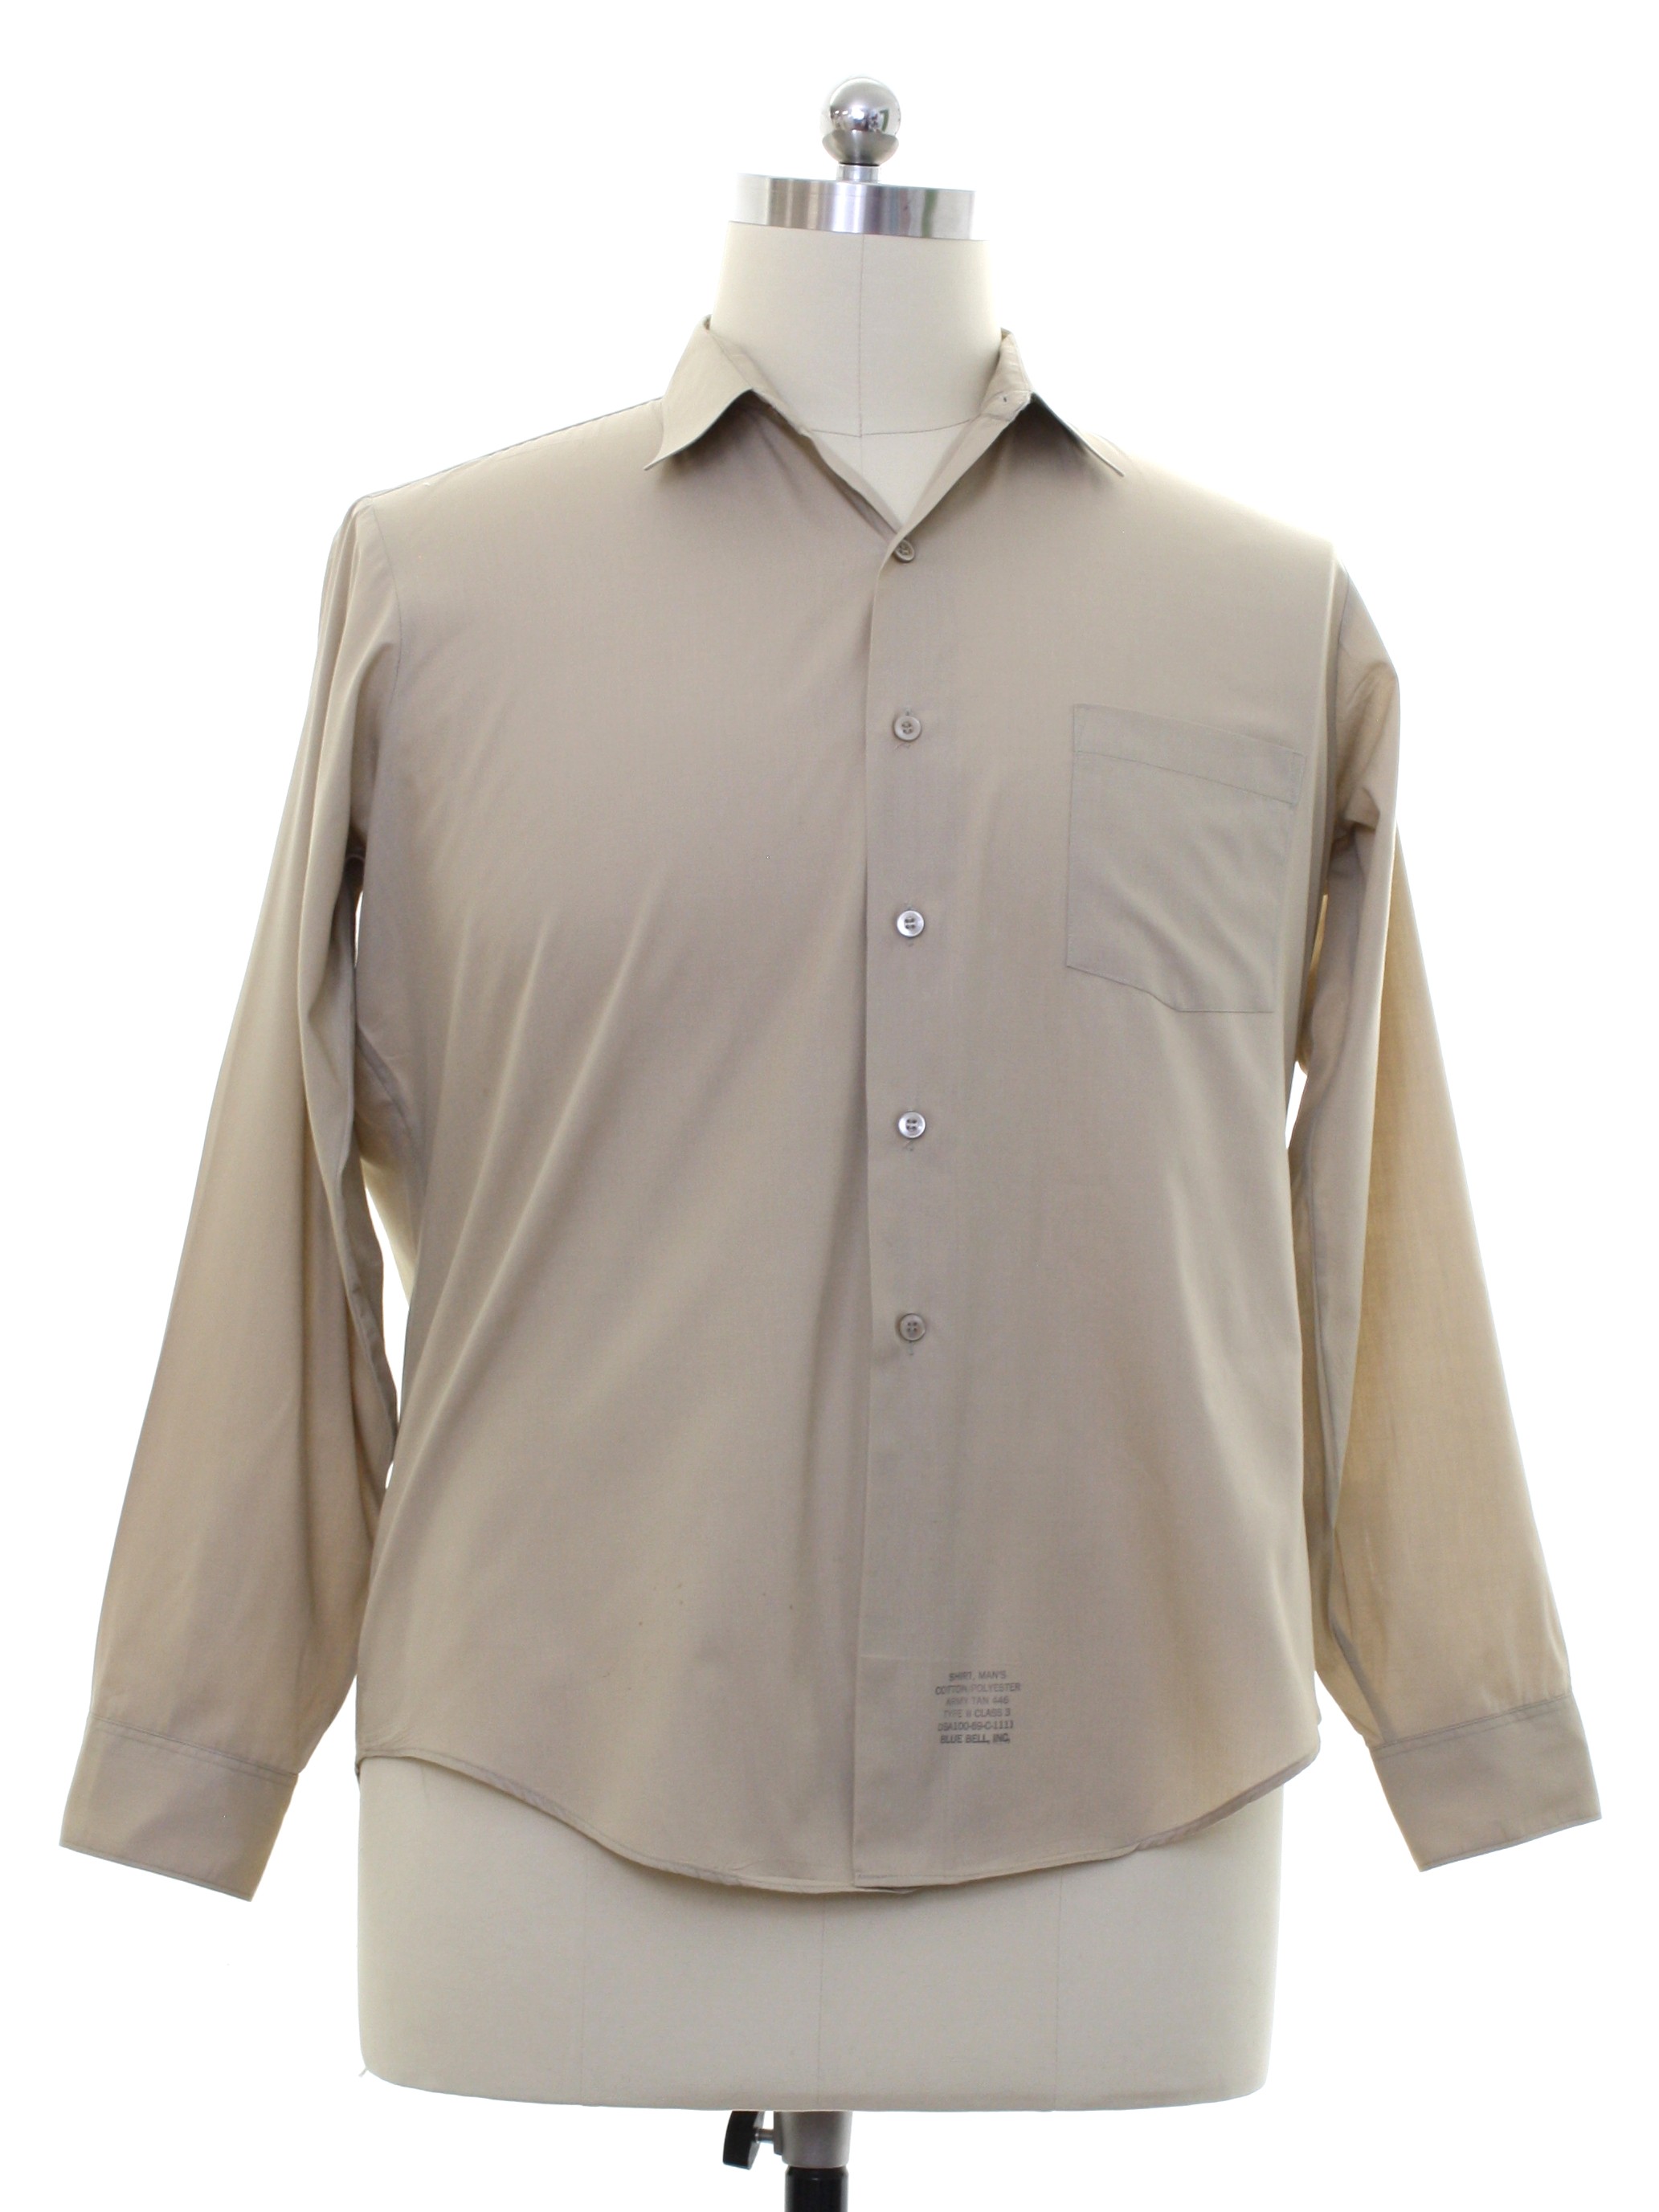 Sixties Vintage Shirt: Early 60s -Blue Bell- Mens army tan cotton ...